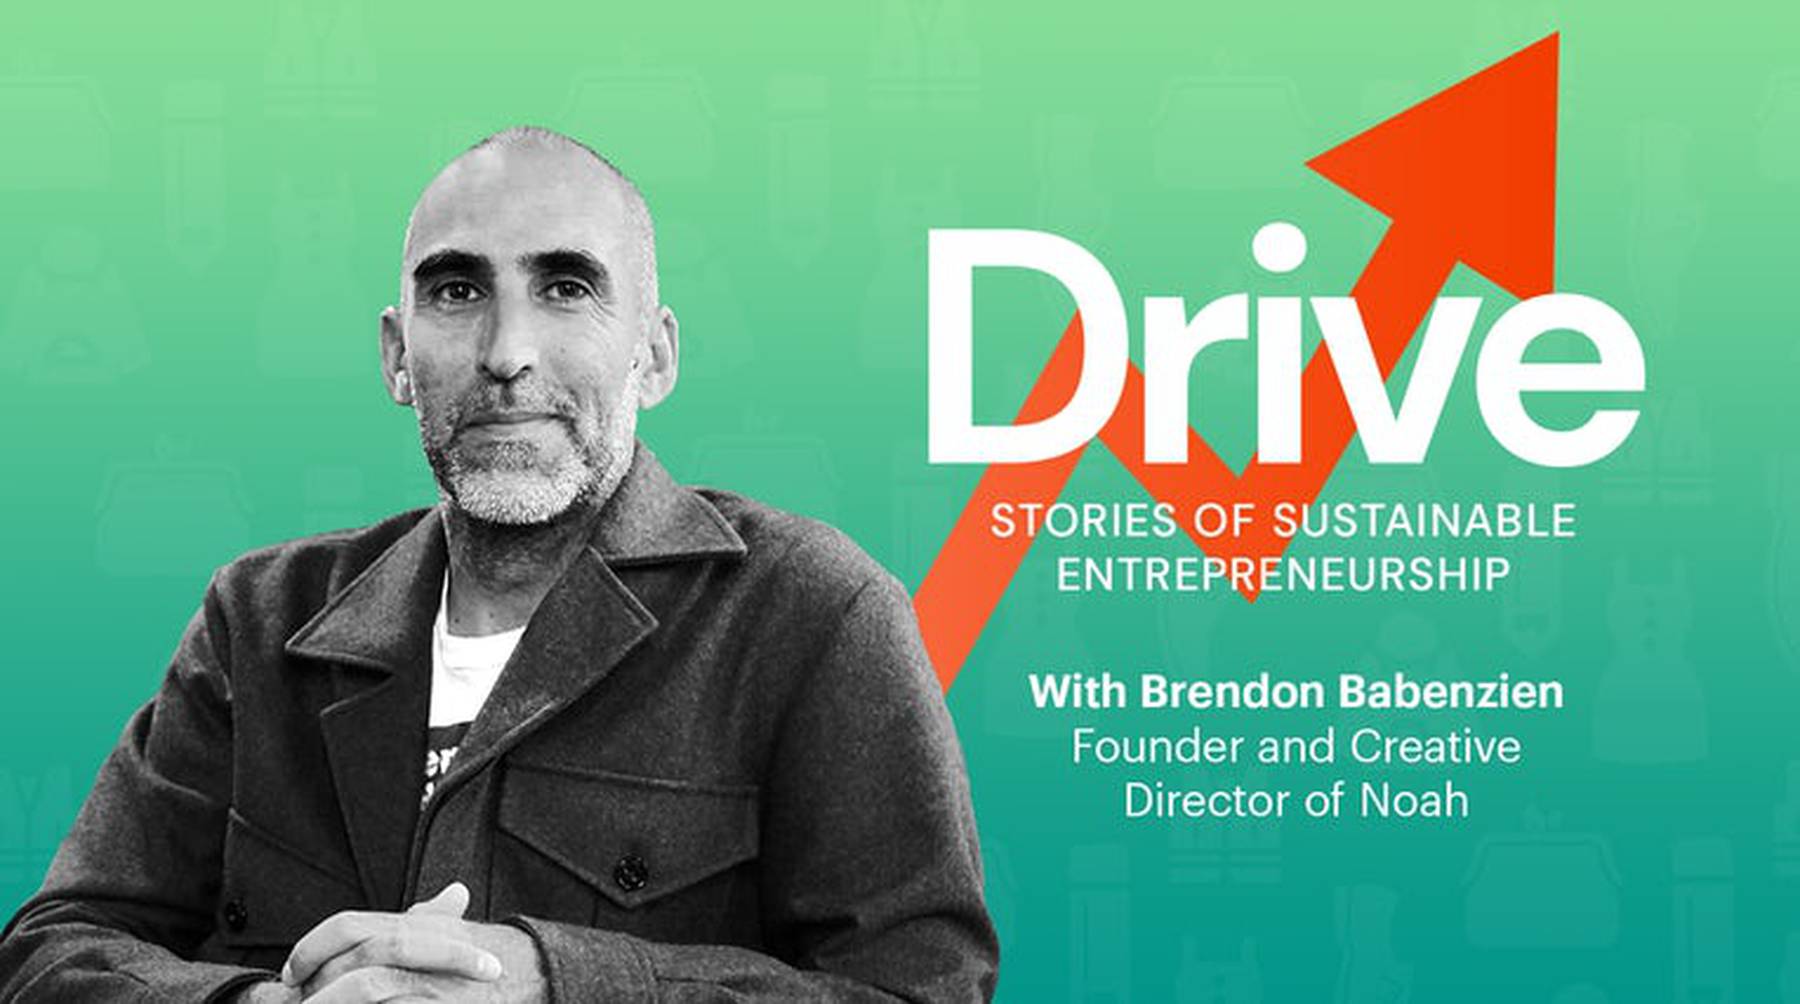 Brendon Babenzien, Founder and Creative Director of Noah, for Drive.